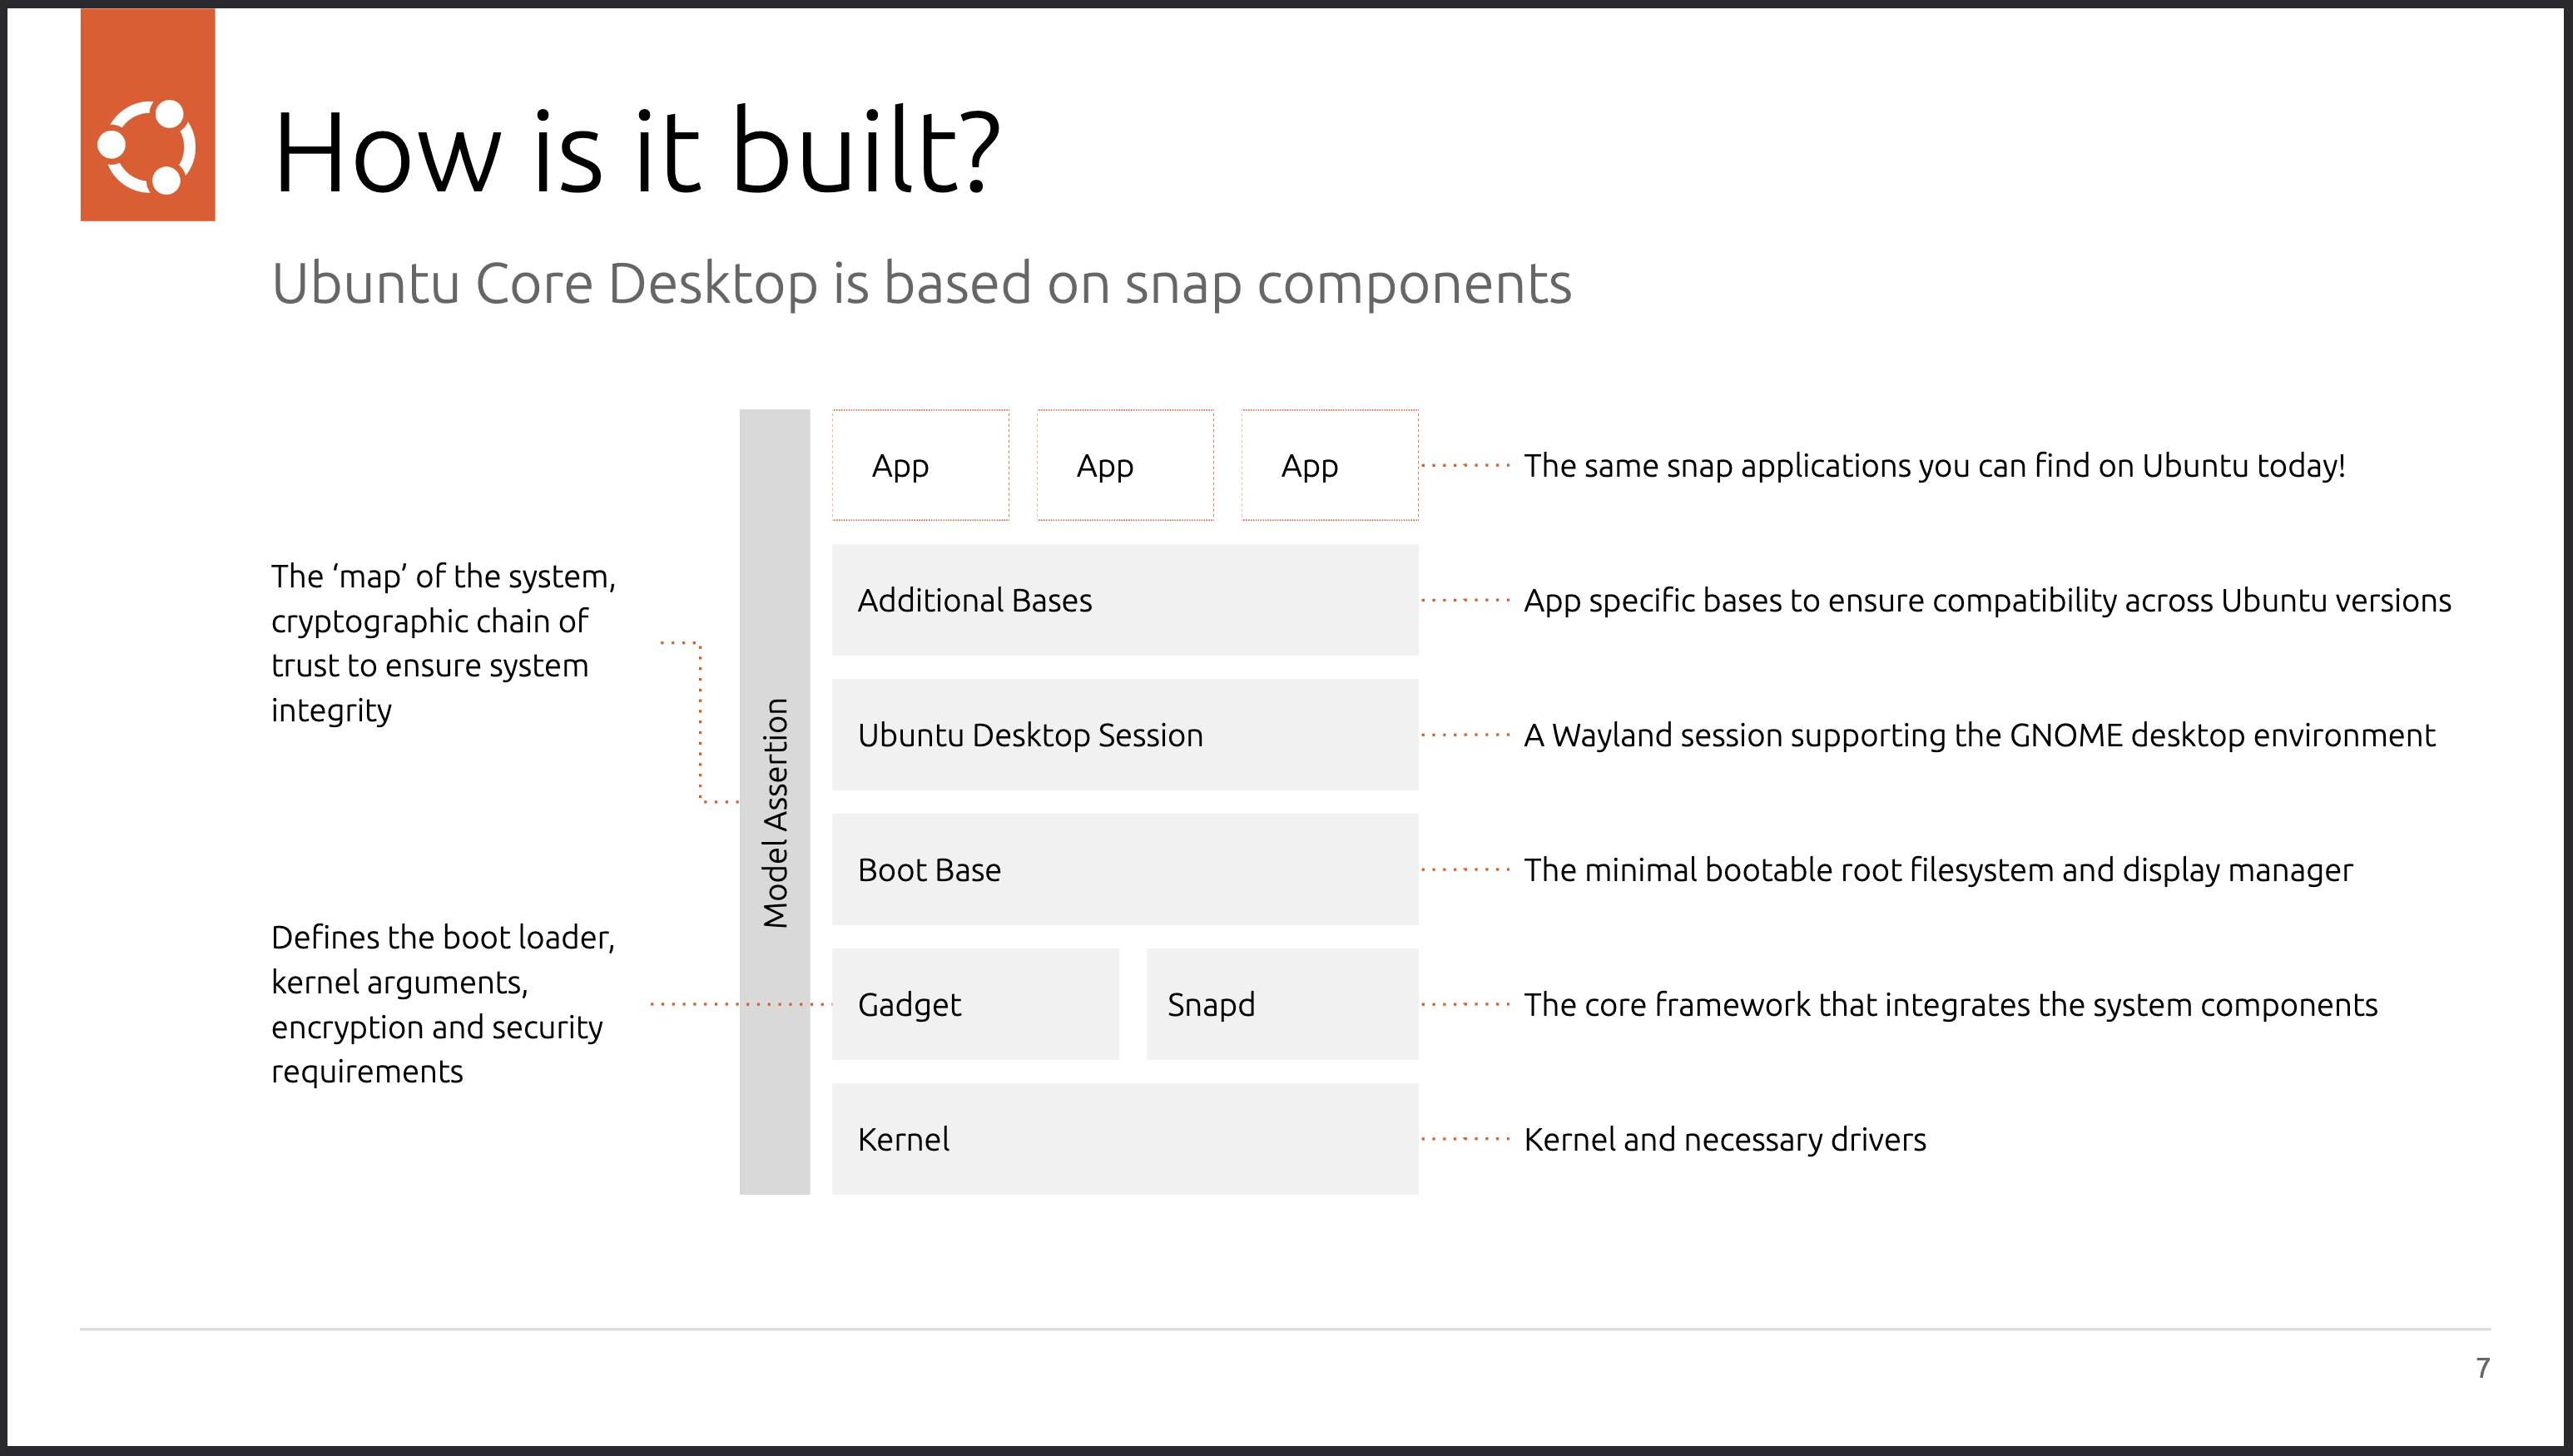 Canonical describes Ubuntu Core Desktop in terms of a seven-layered design, from kernel up to multiple Snap apps.